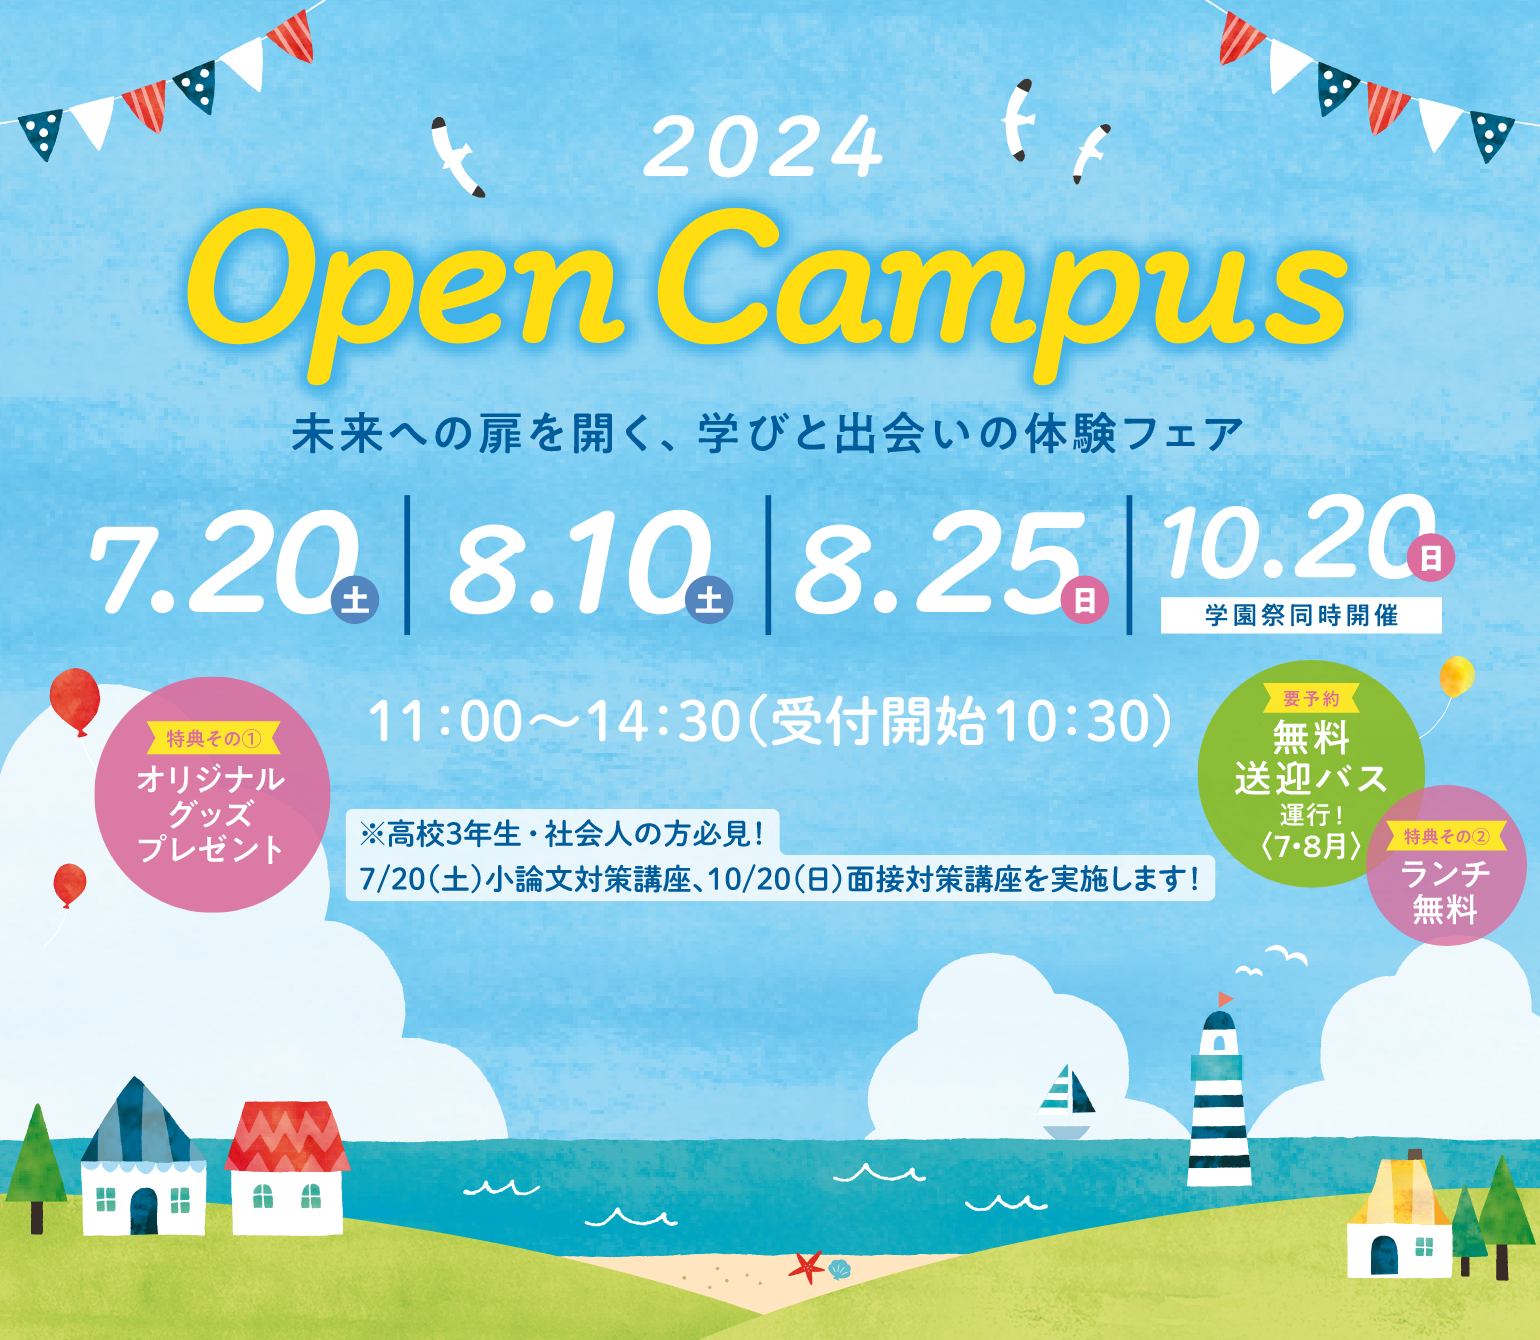 Open Campus in Spring 2024 3.23